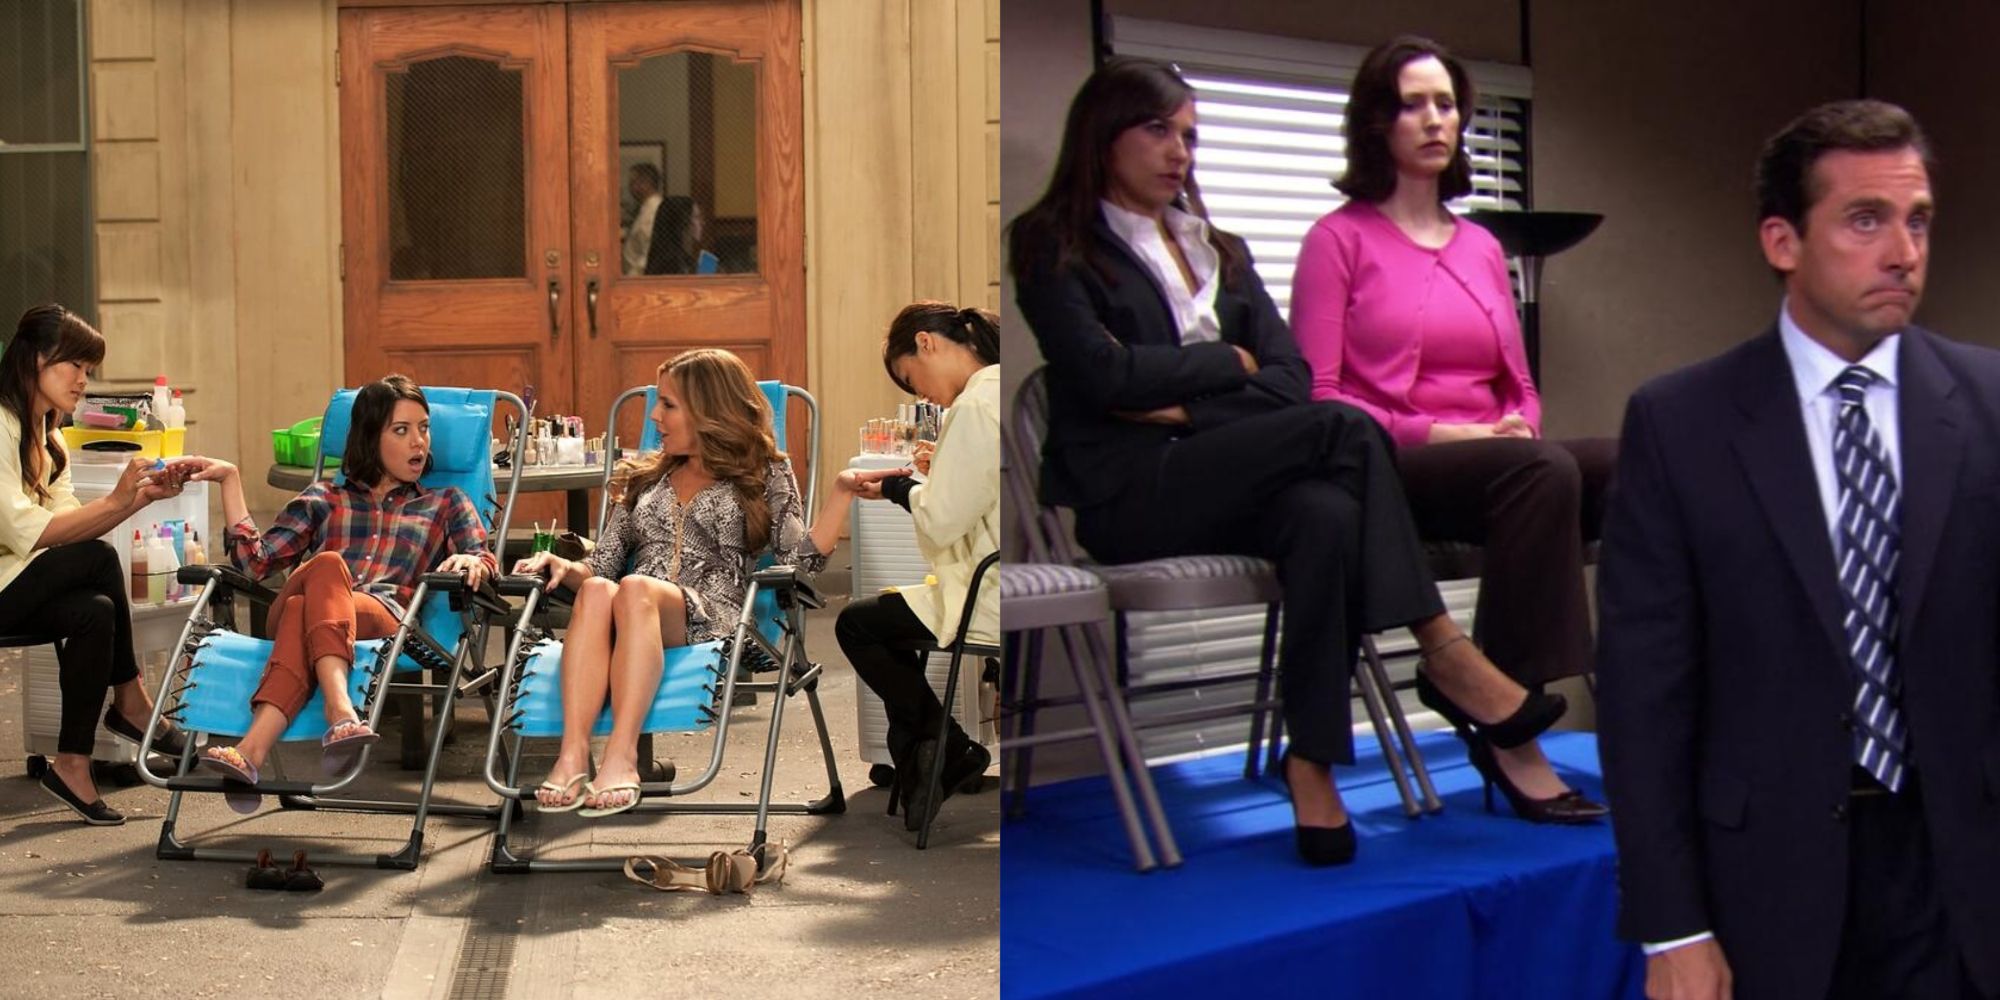 April Ludgate with Eagleton employee on chairs and Michael Scott with Stanford employees